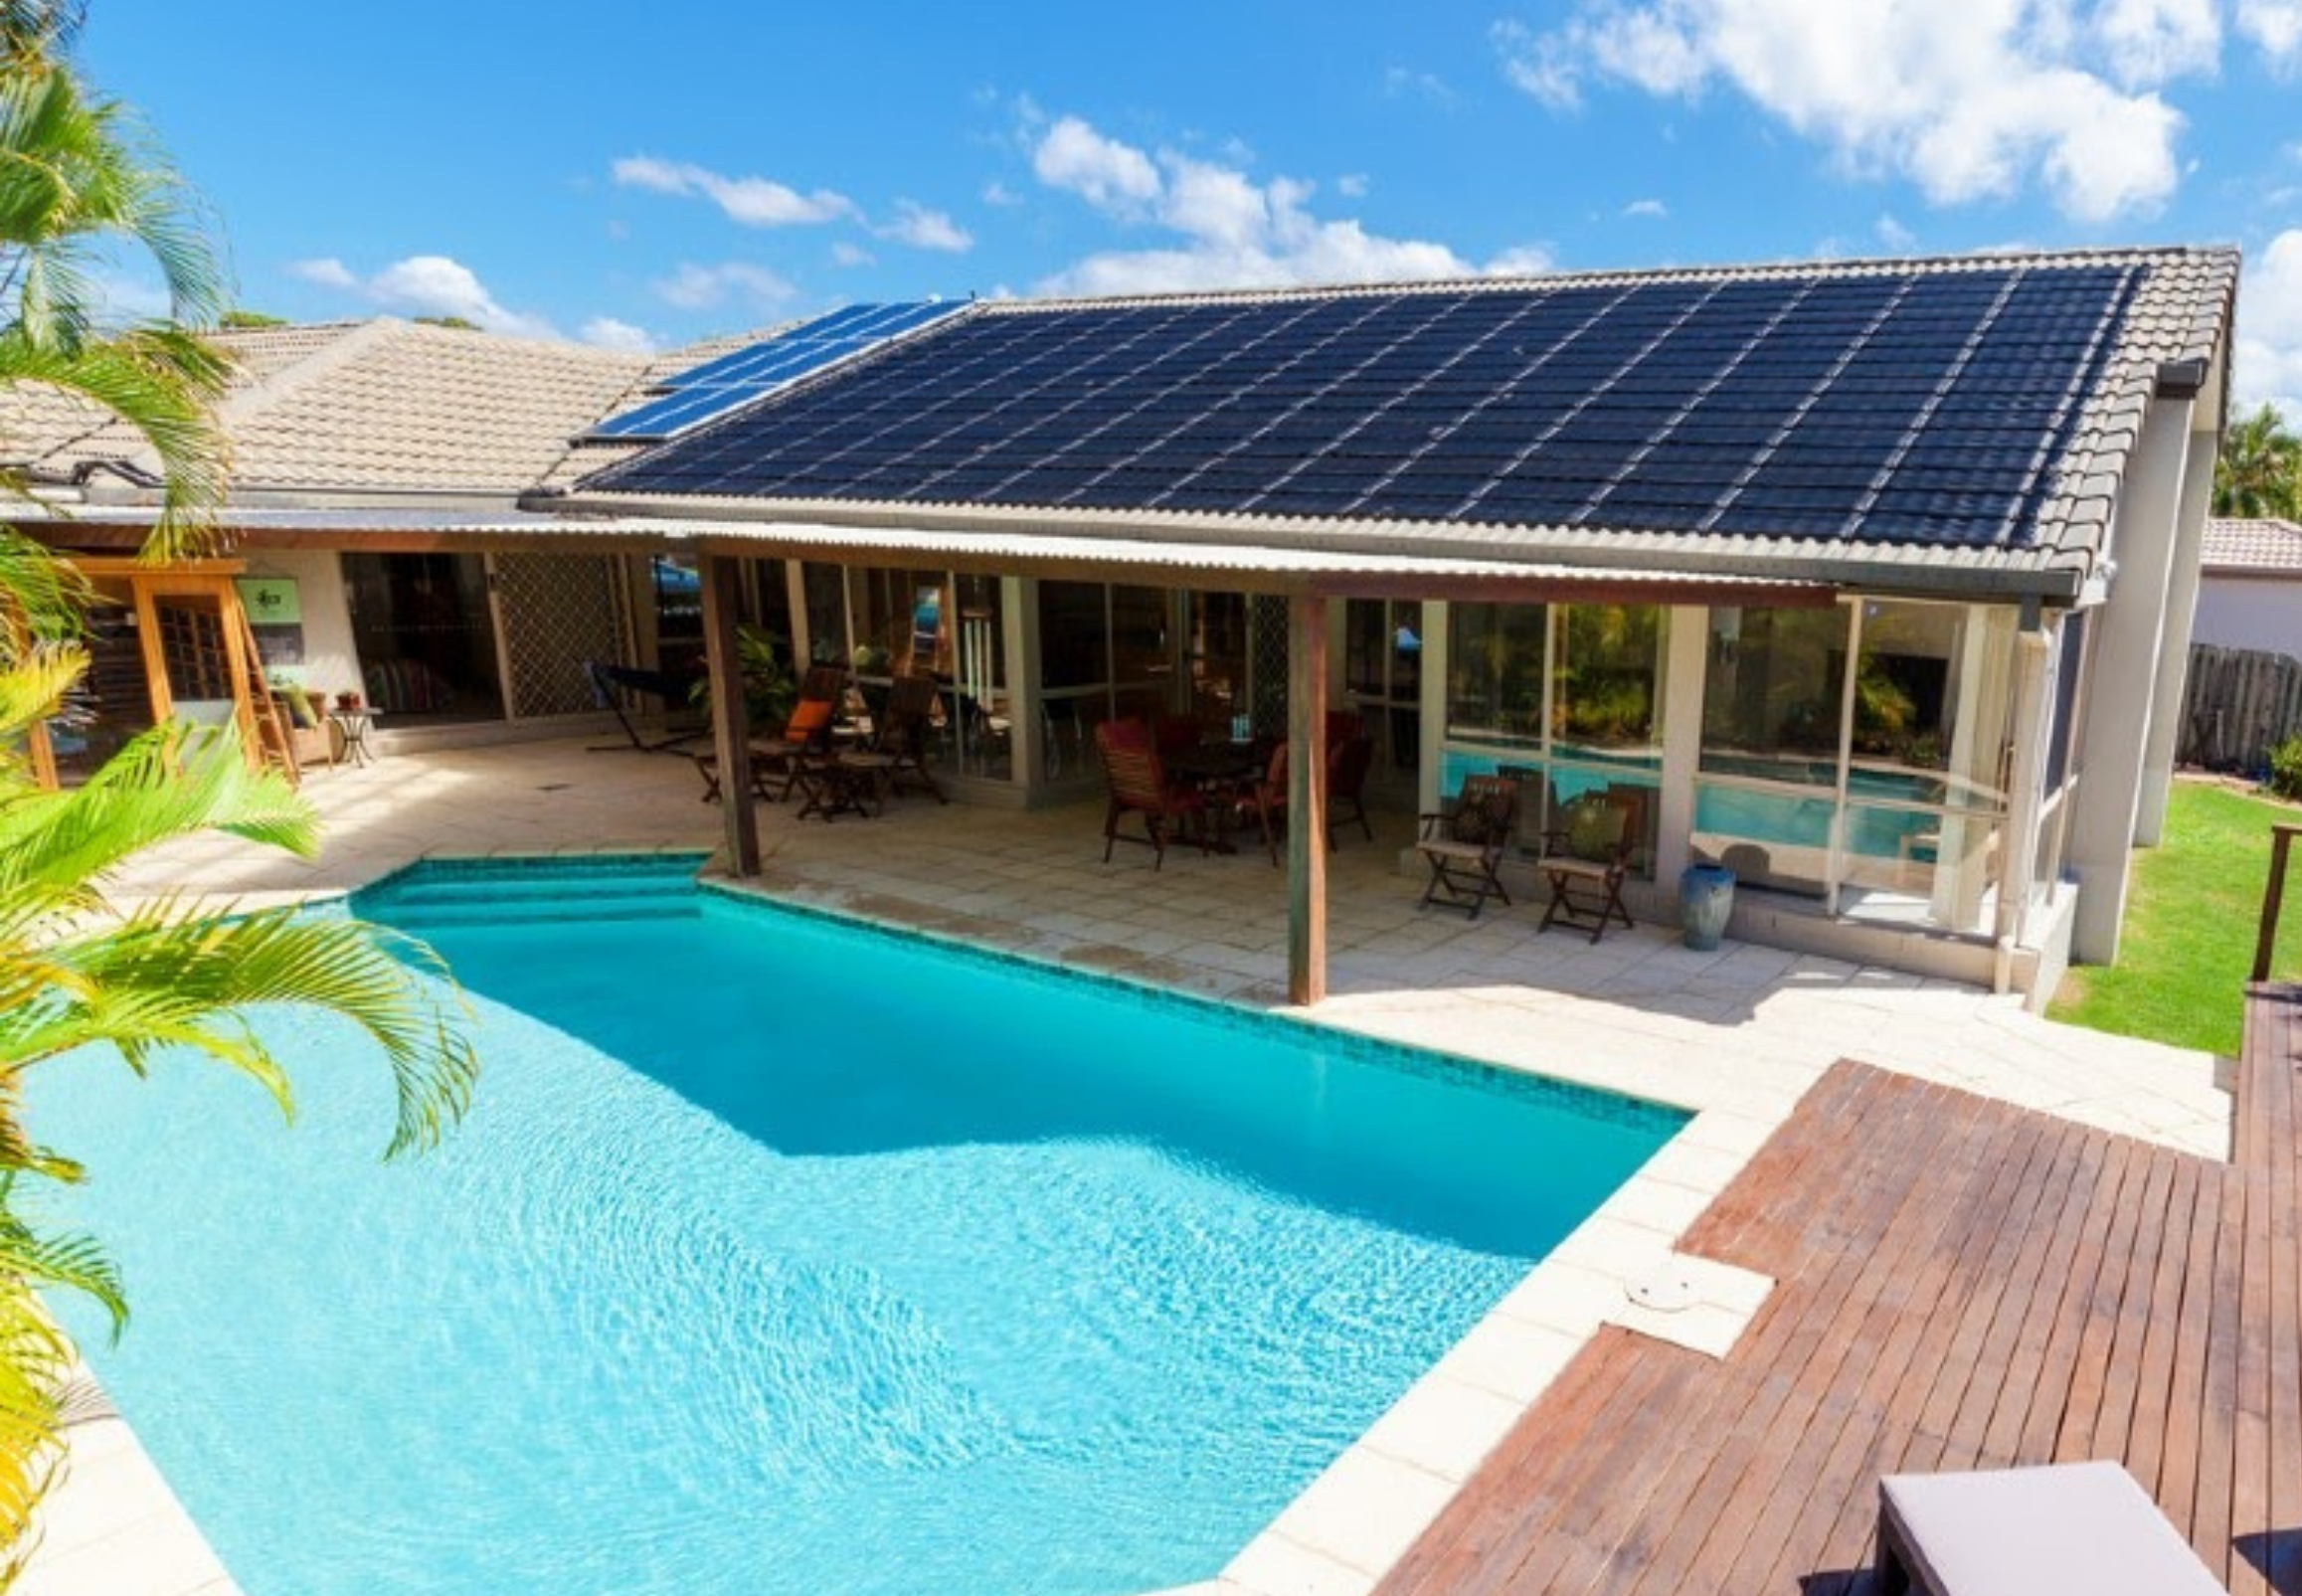 Rooftop Solar Powered Home